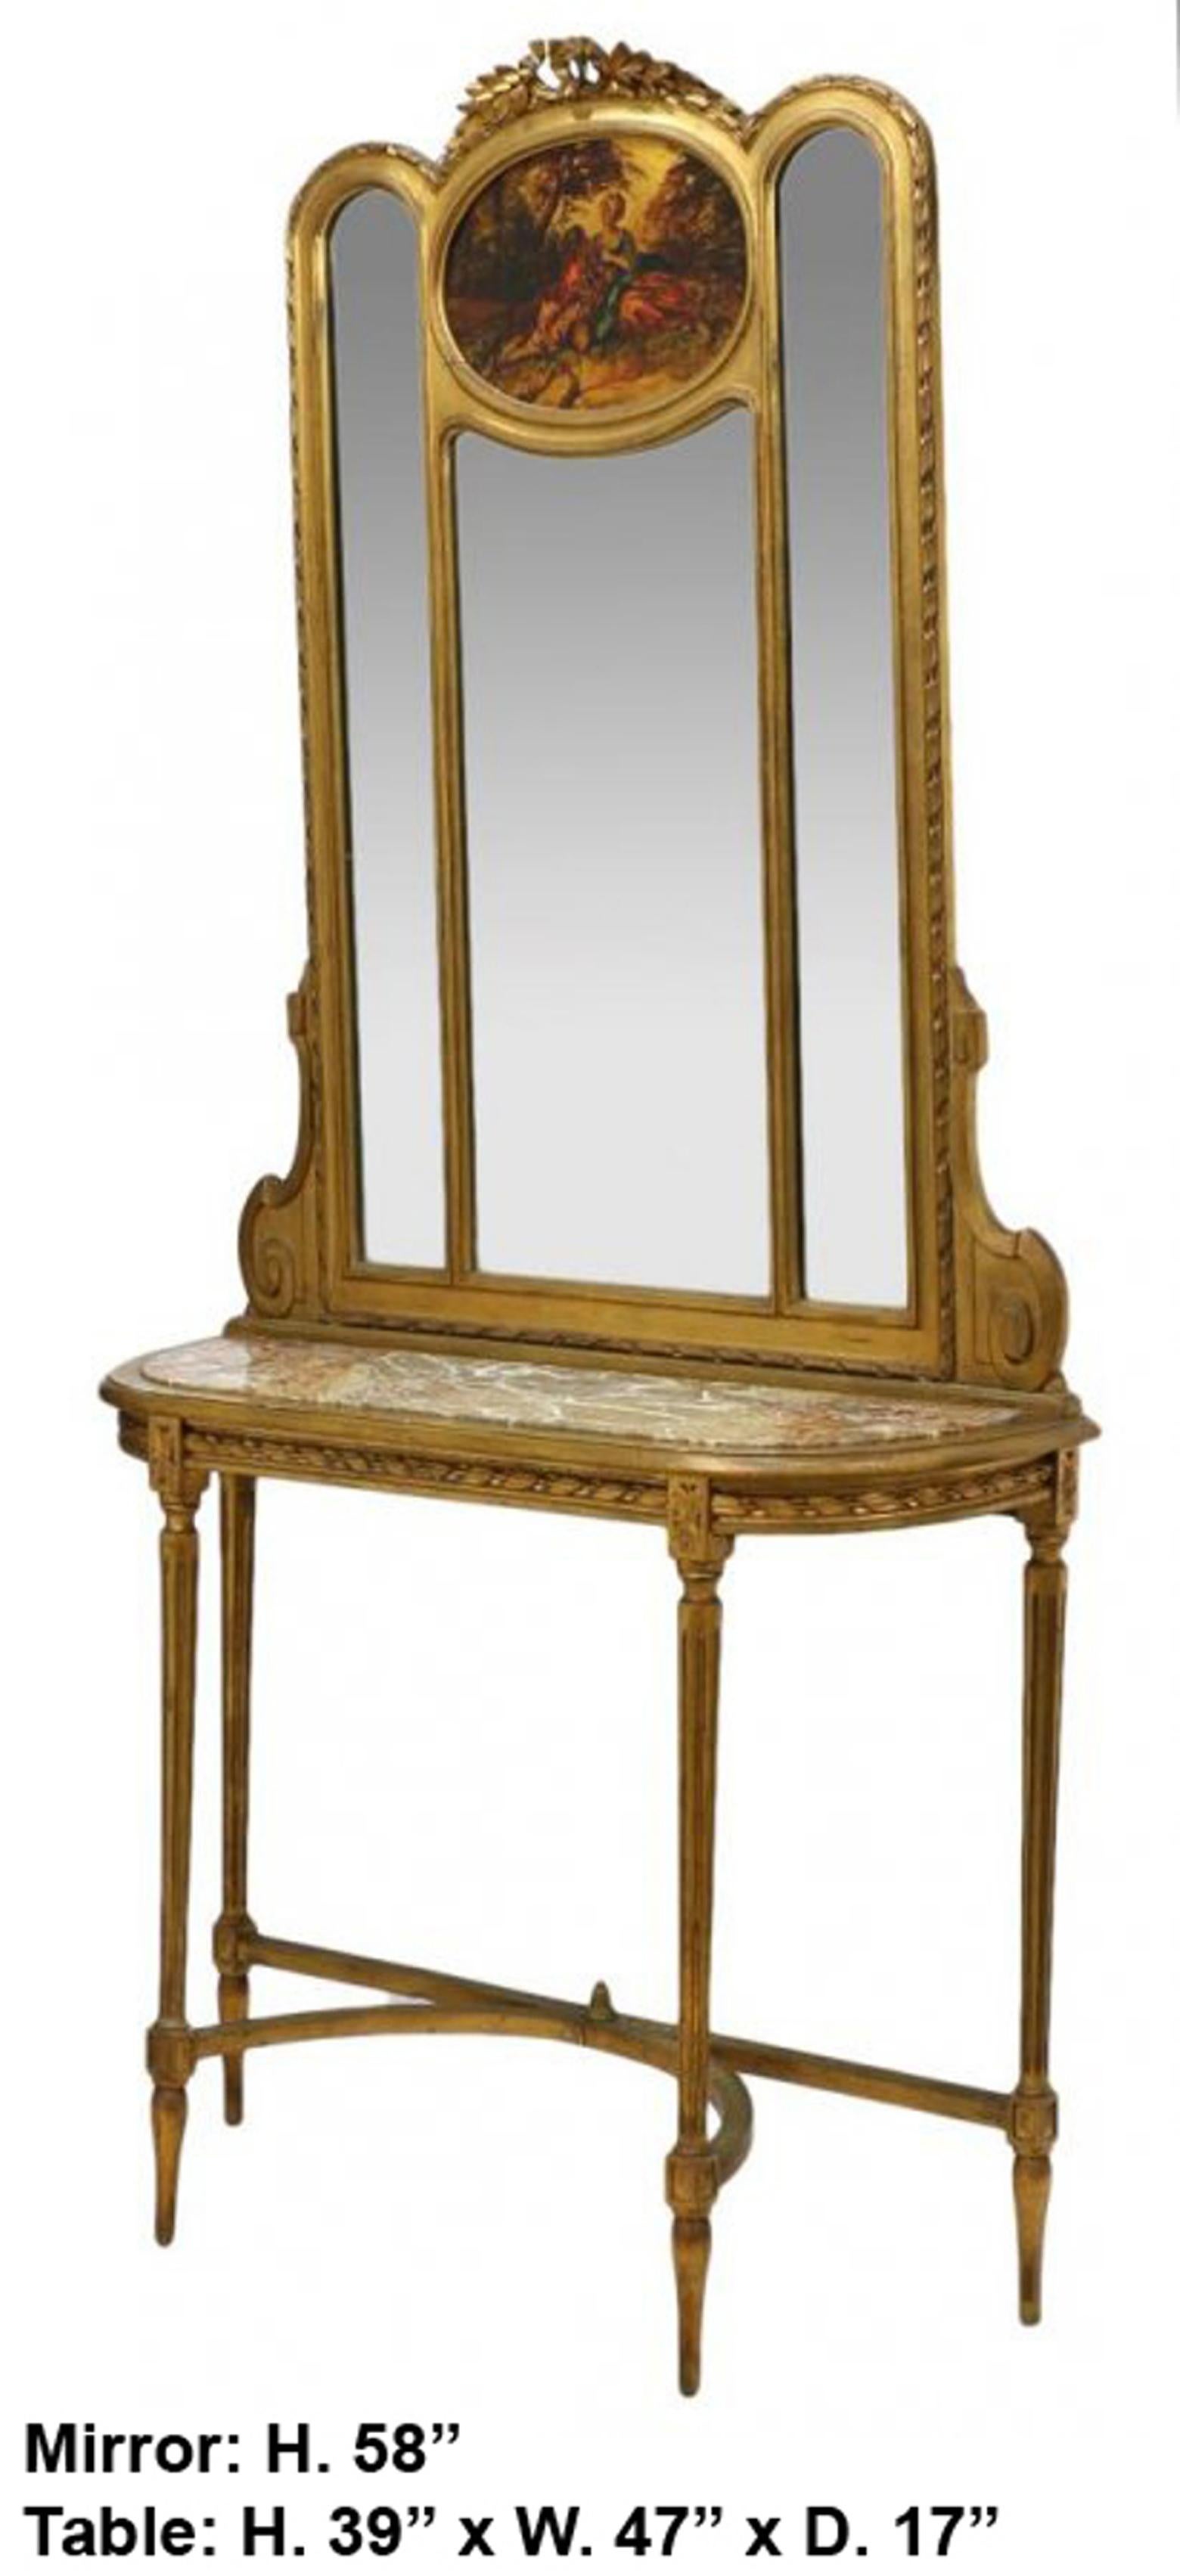 Beautiful French Louis XVI style Vernis Martin giltwood Trumeau mirror and console, 19th century.

The carved giltwood mirror is surmounted with a foliate-inspired crest over an oval oil on canvas depicting a romantic scene of a French couple in